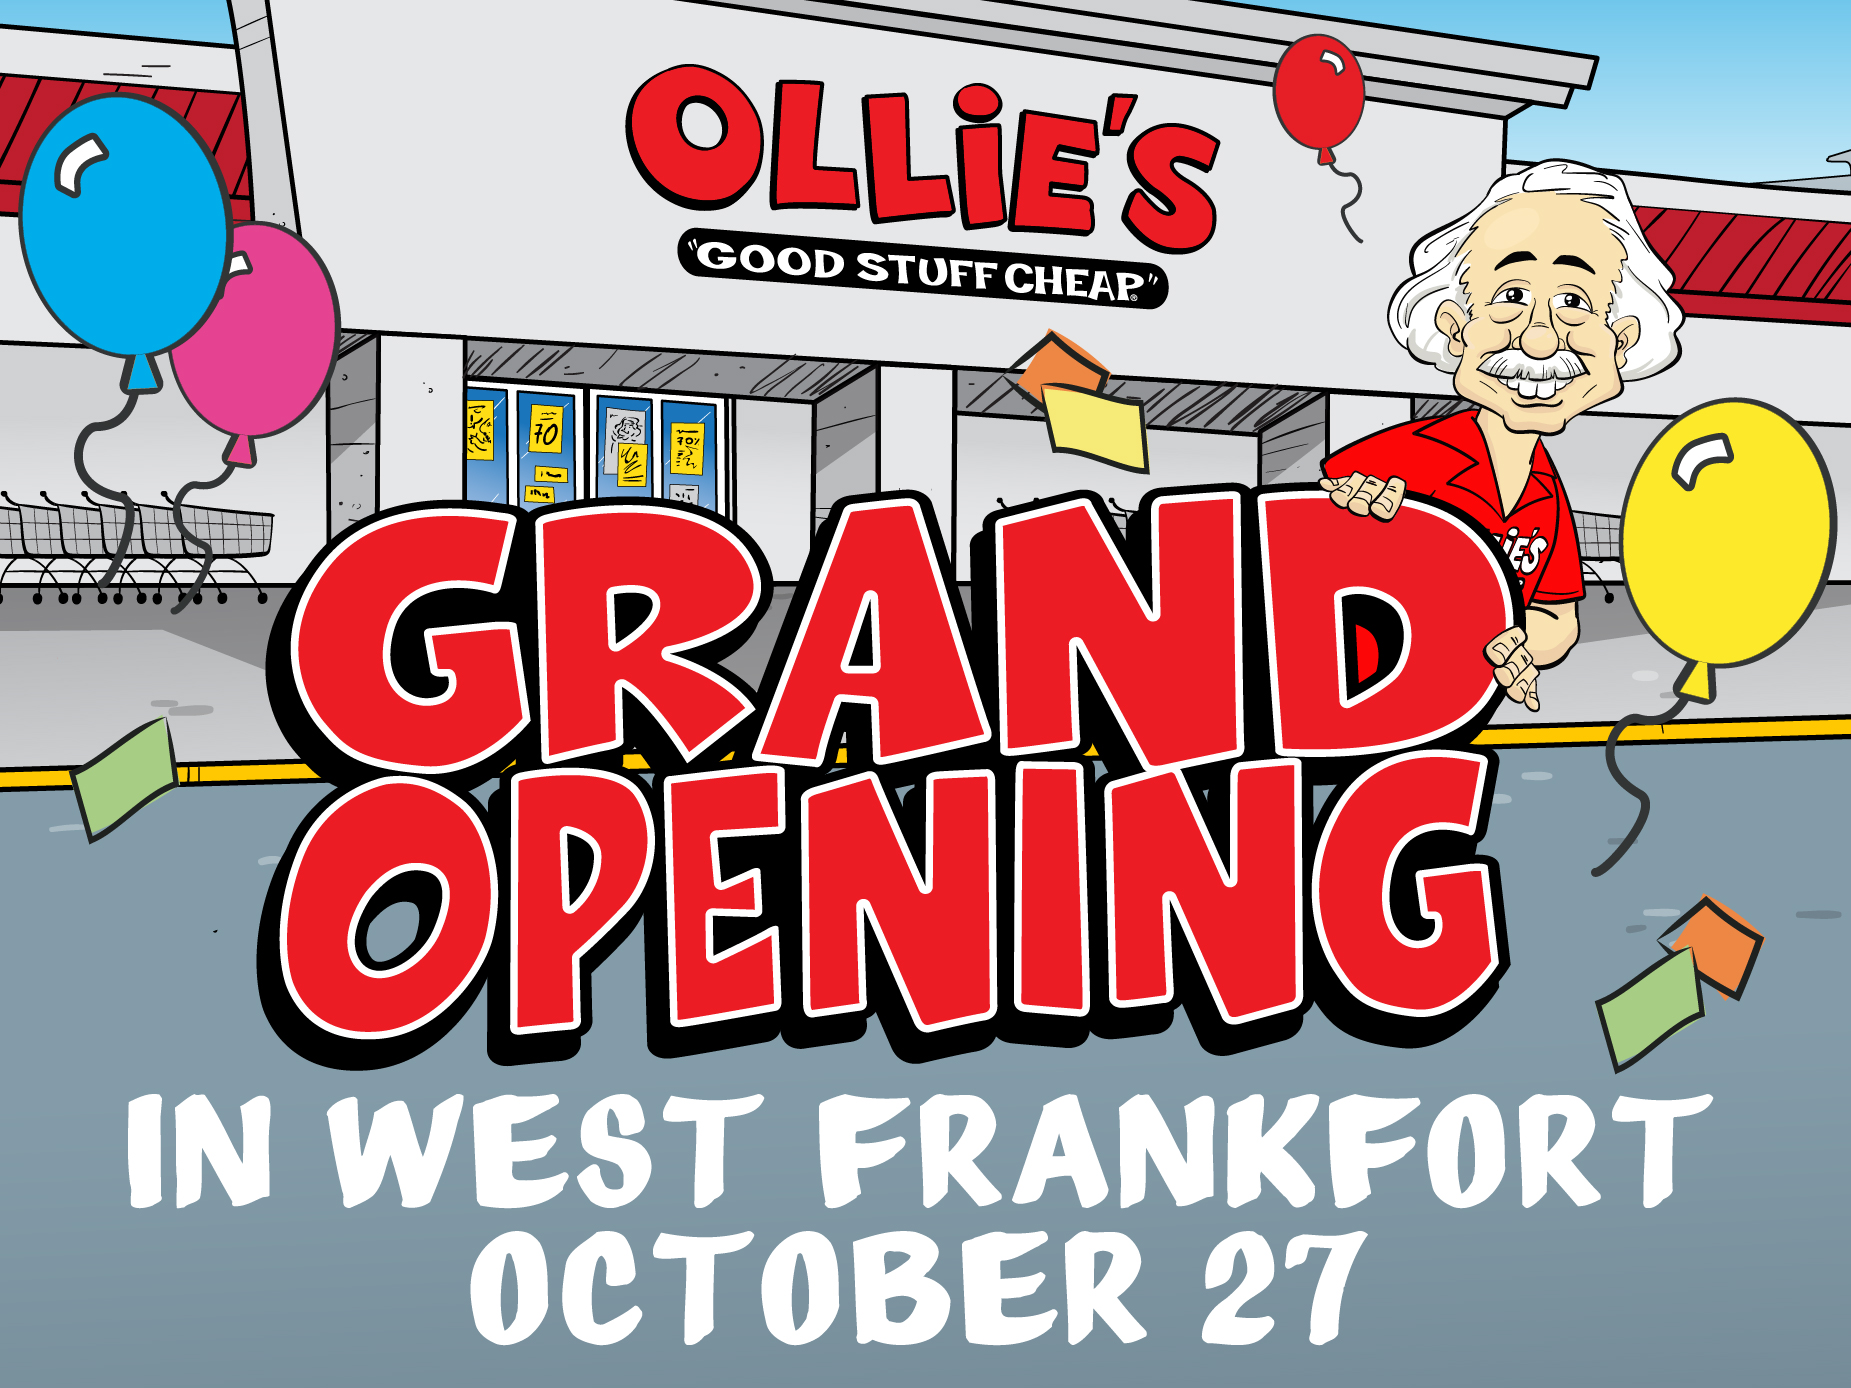 West Frankfort, IL Opening 10/27/21 Ollie's Bargain Outlet